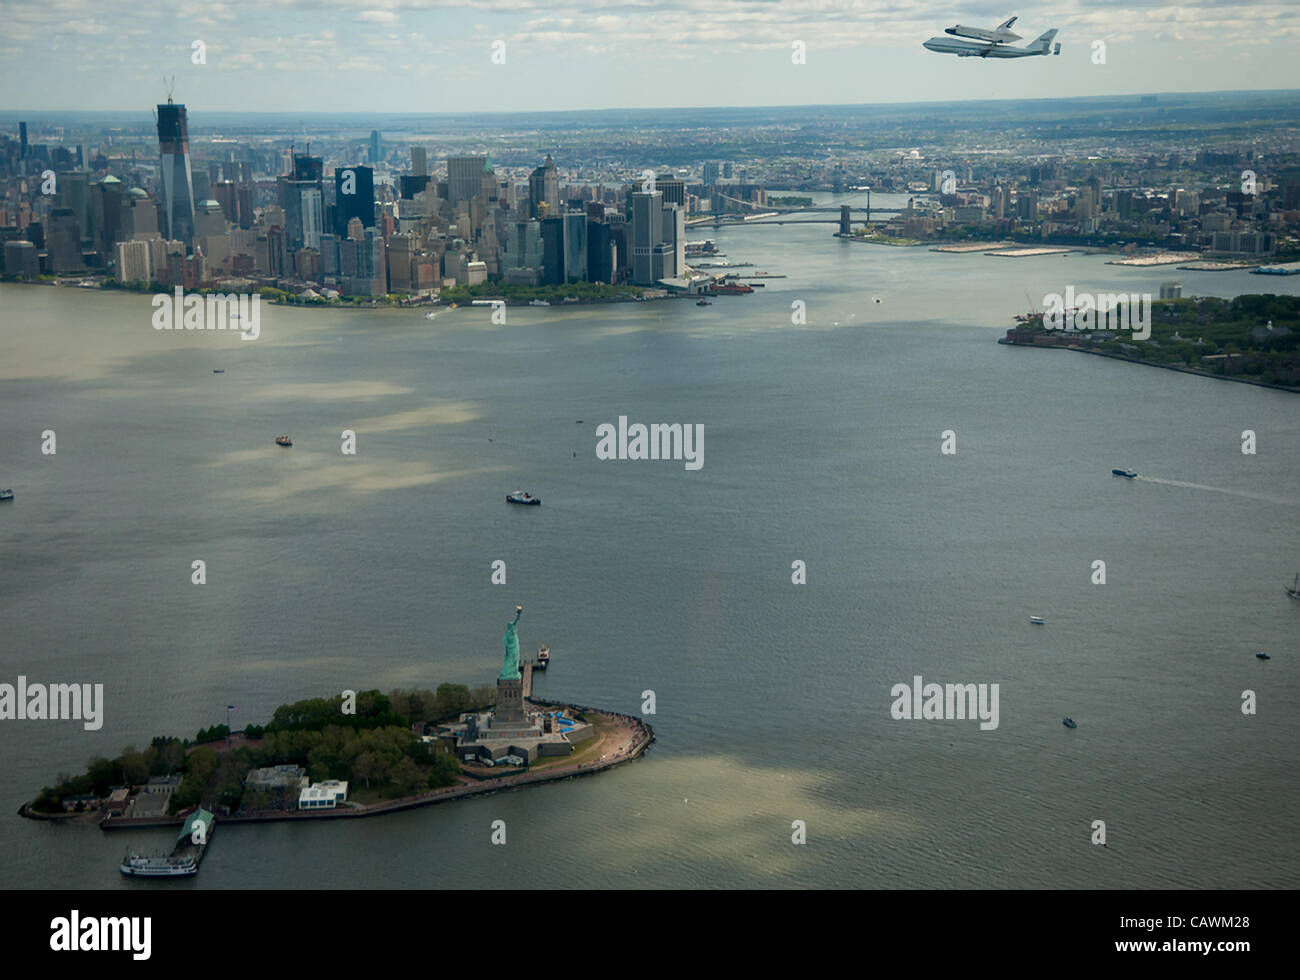 Space shuttle Enterprise, mounted atop a NASA 747 Shuttle Carrier Aircraft (SCA), is seen as it flies near the Statue of Liberty and the Manhattan skyline, Friday, April 27, 2012, in New York. Enterprise was the first shuttle orbiter built for NASA performing test flights in the atmosphere and was i Stock Photo